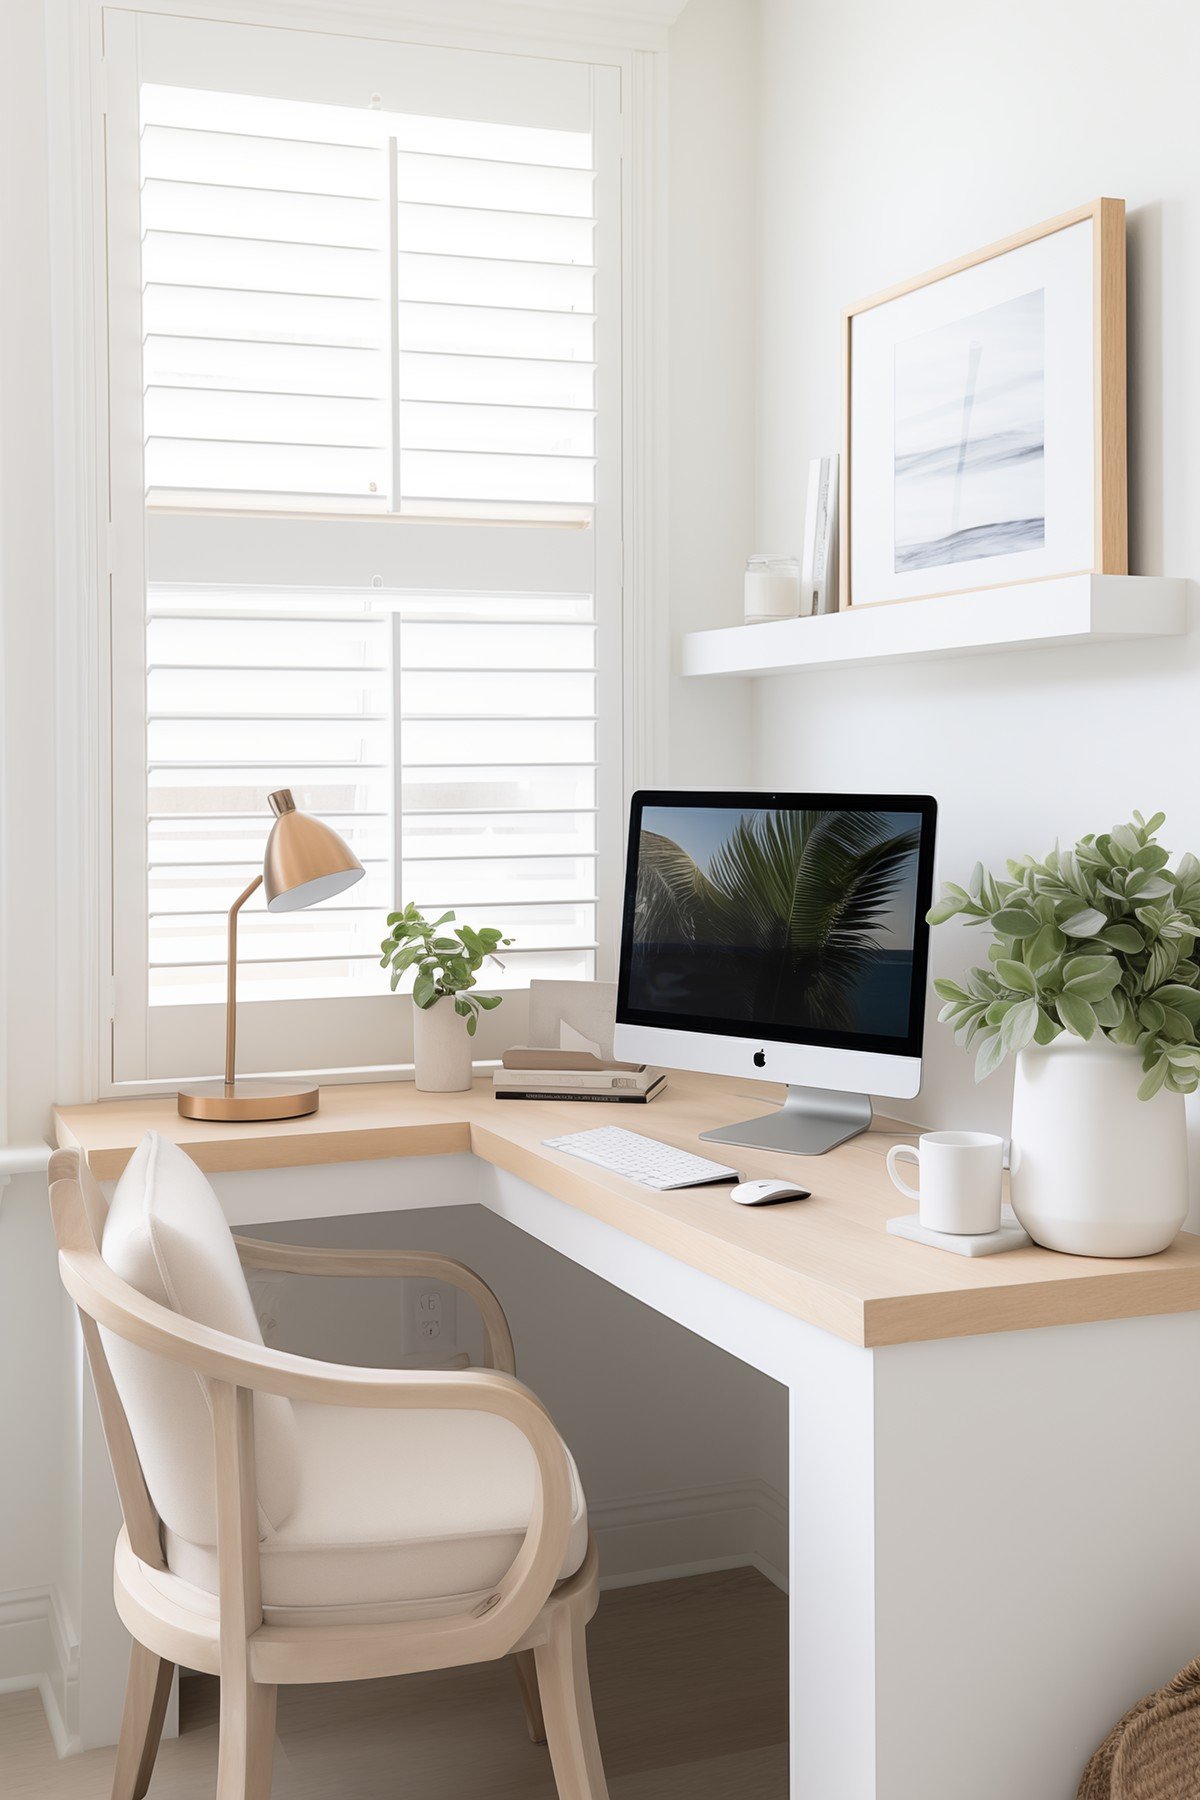 Modern home office with white desk, beige chair, desktop computer, and plants against shuttered windows